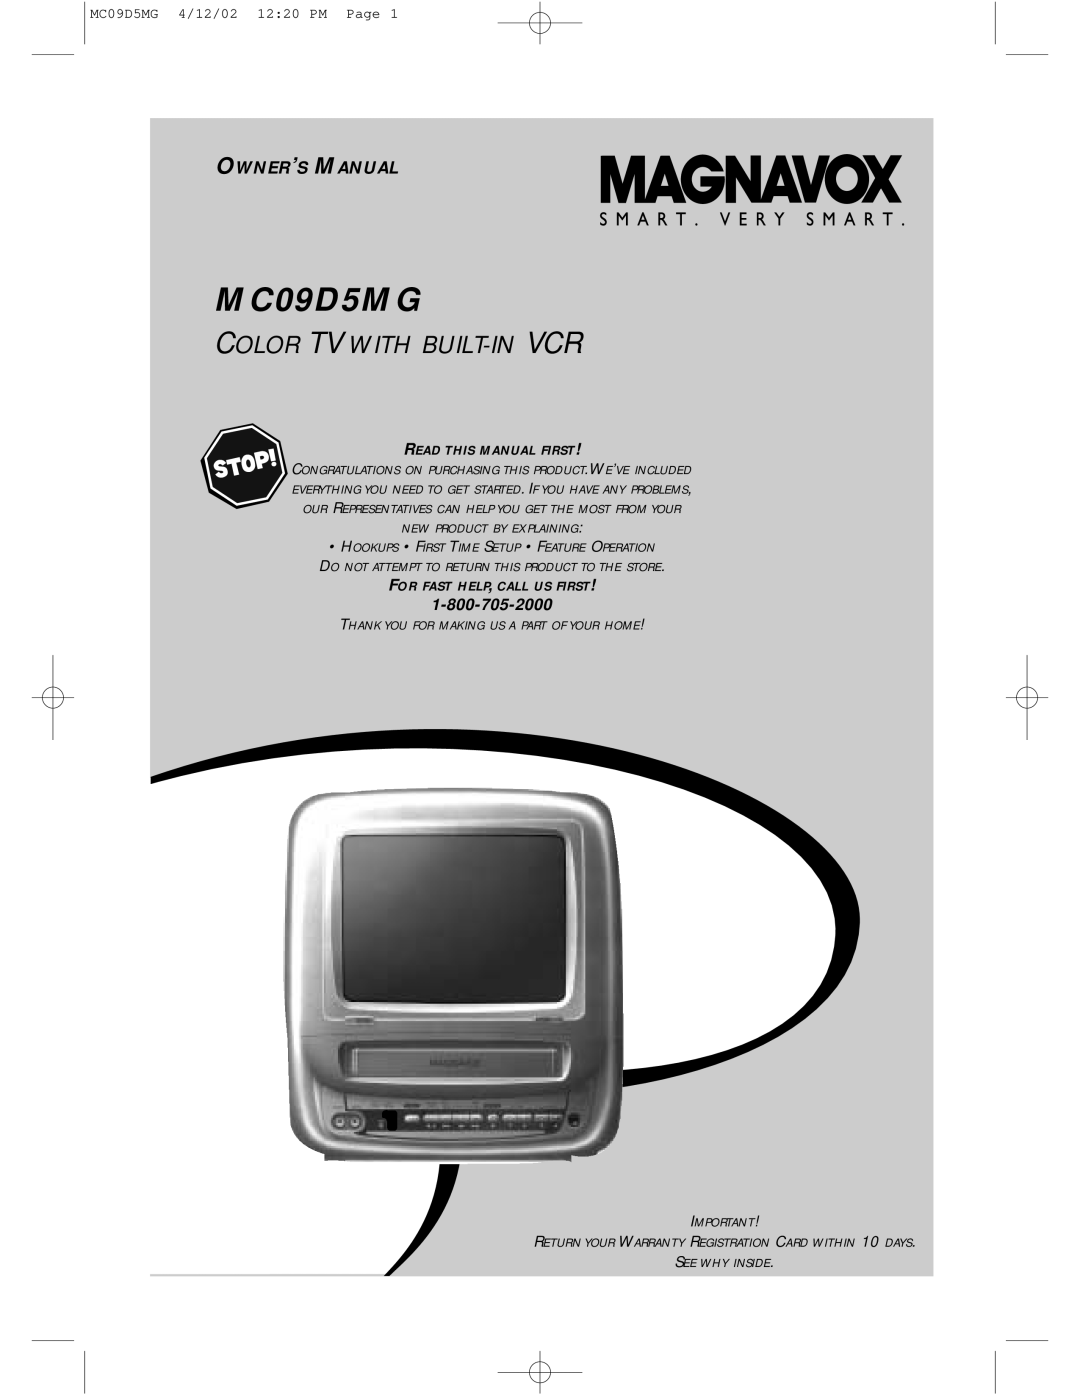 Magnavox owner manual Color Tv With Built-In Vcr, Owner’S Manual, MC09D5MG 4/12/02 1220 PM Page, Read This Manual First 